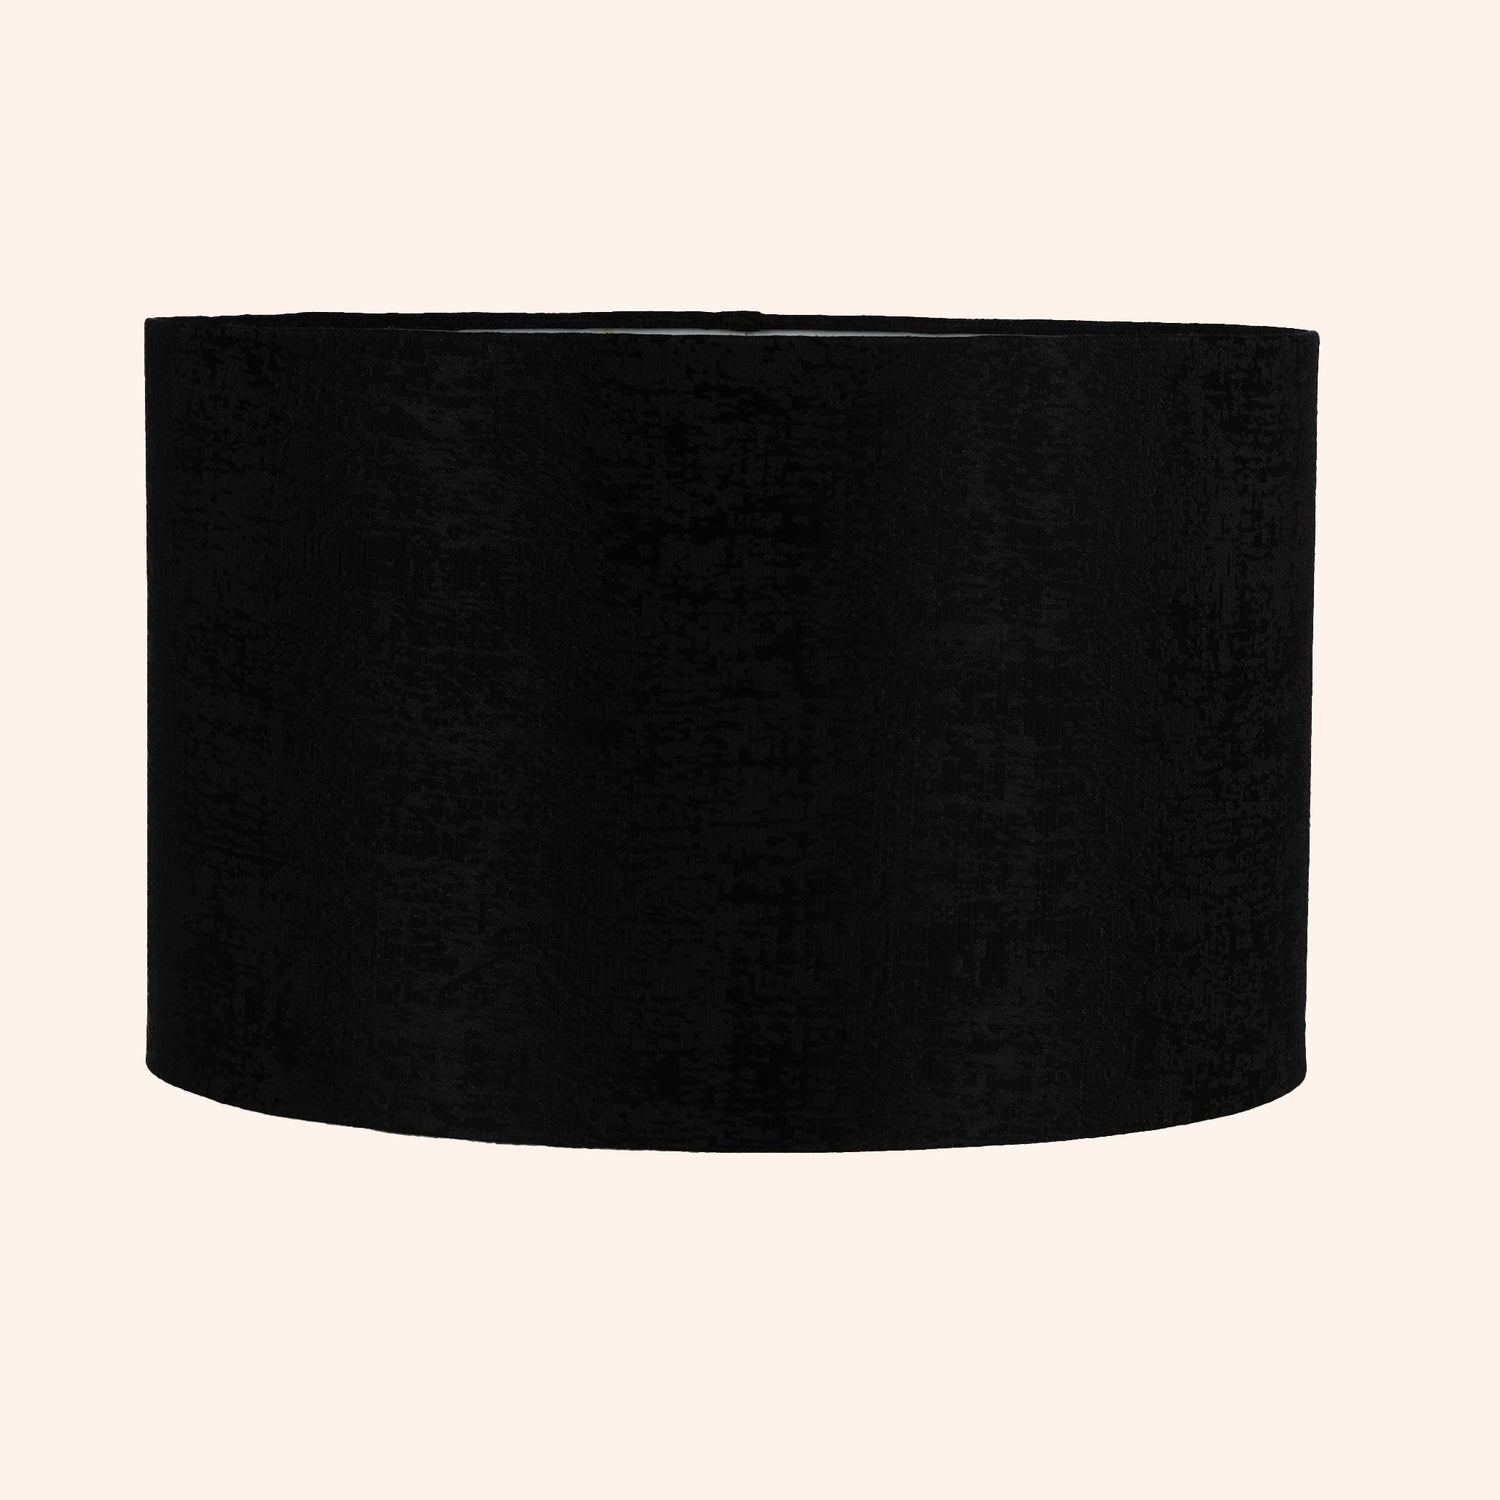 Drum shape lamp shade in black color.